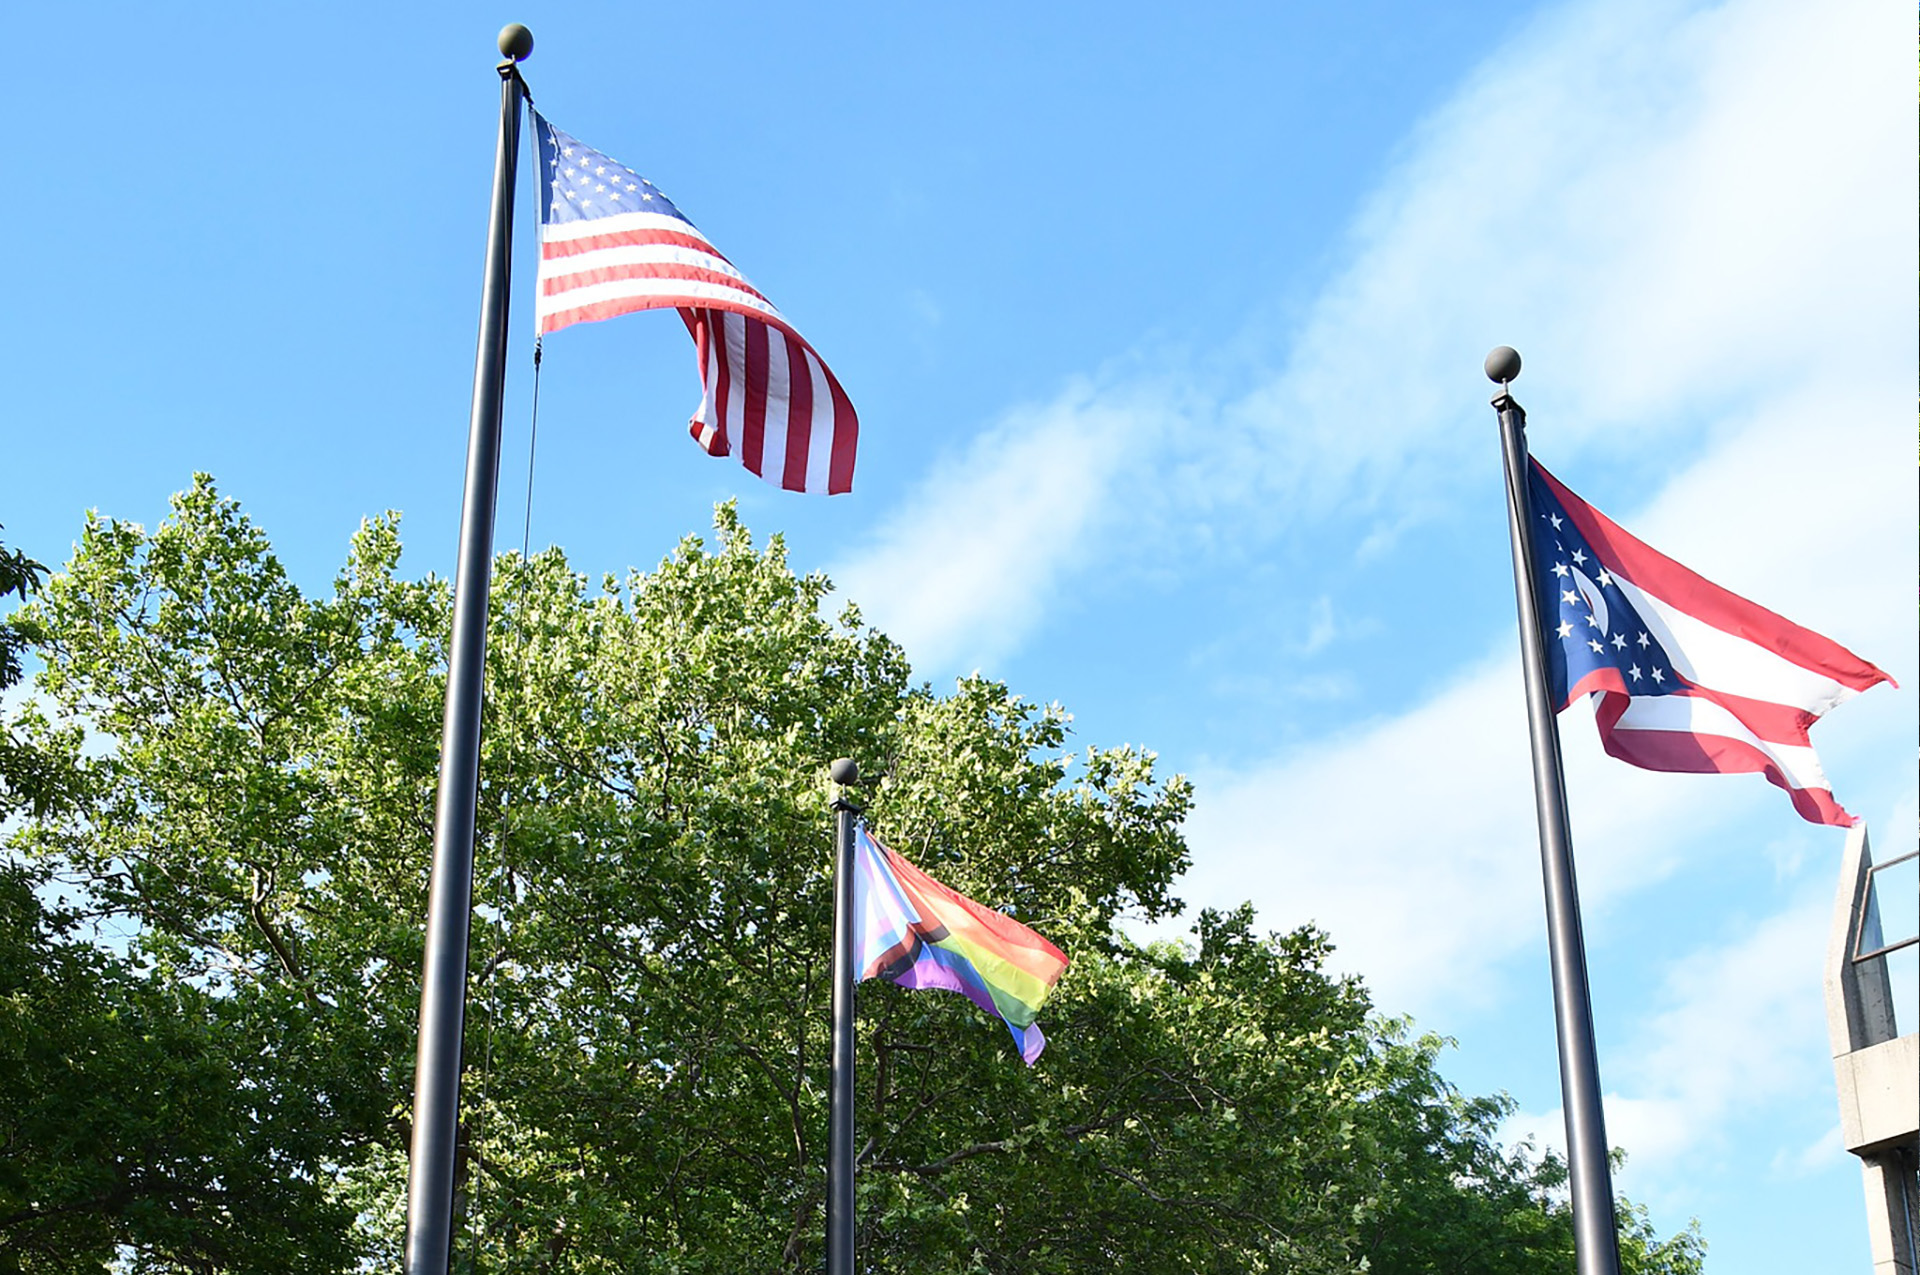 Each June, community leaders, including members of City Council and the Community Relations Committee, invite the community to join with them as the Pride Flag is raised on the front plaza of the Municipal Services Center.